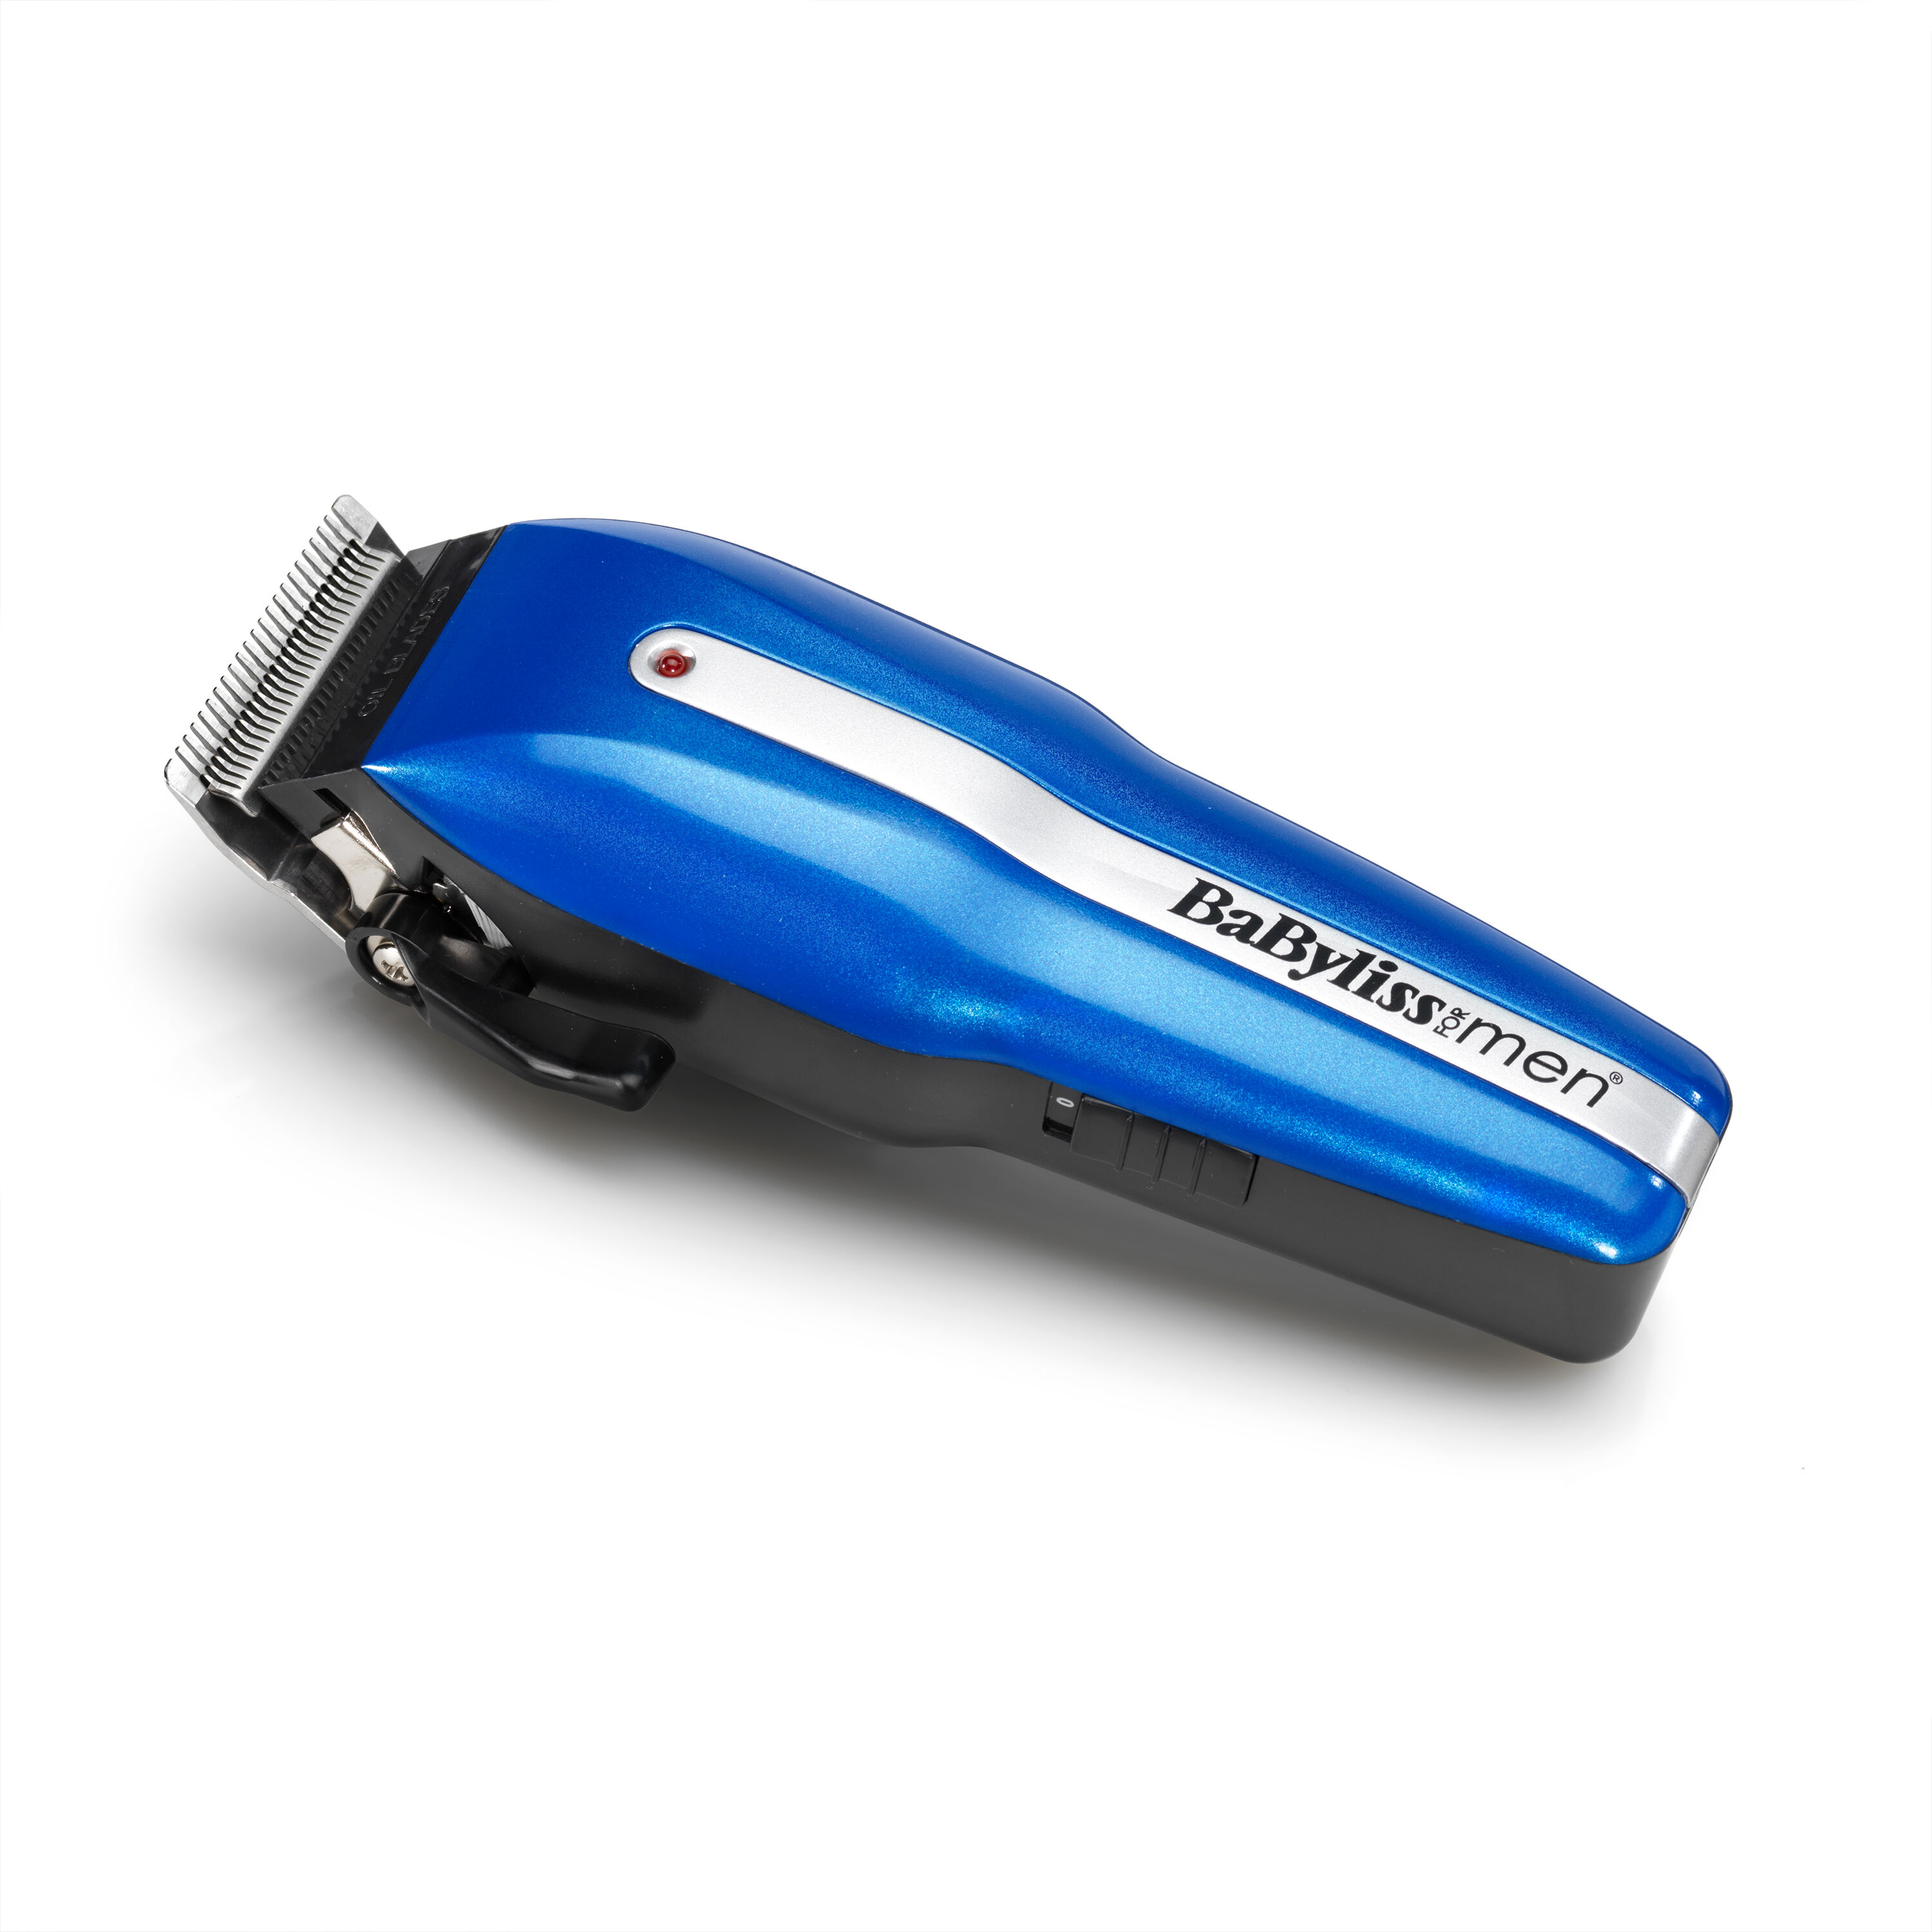 babyliss clippers 7498cu